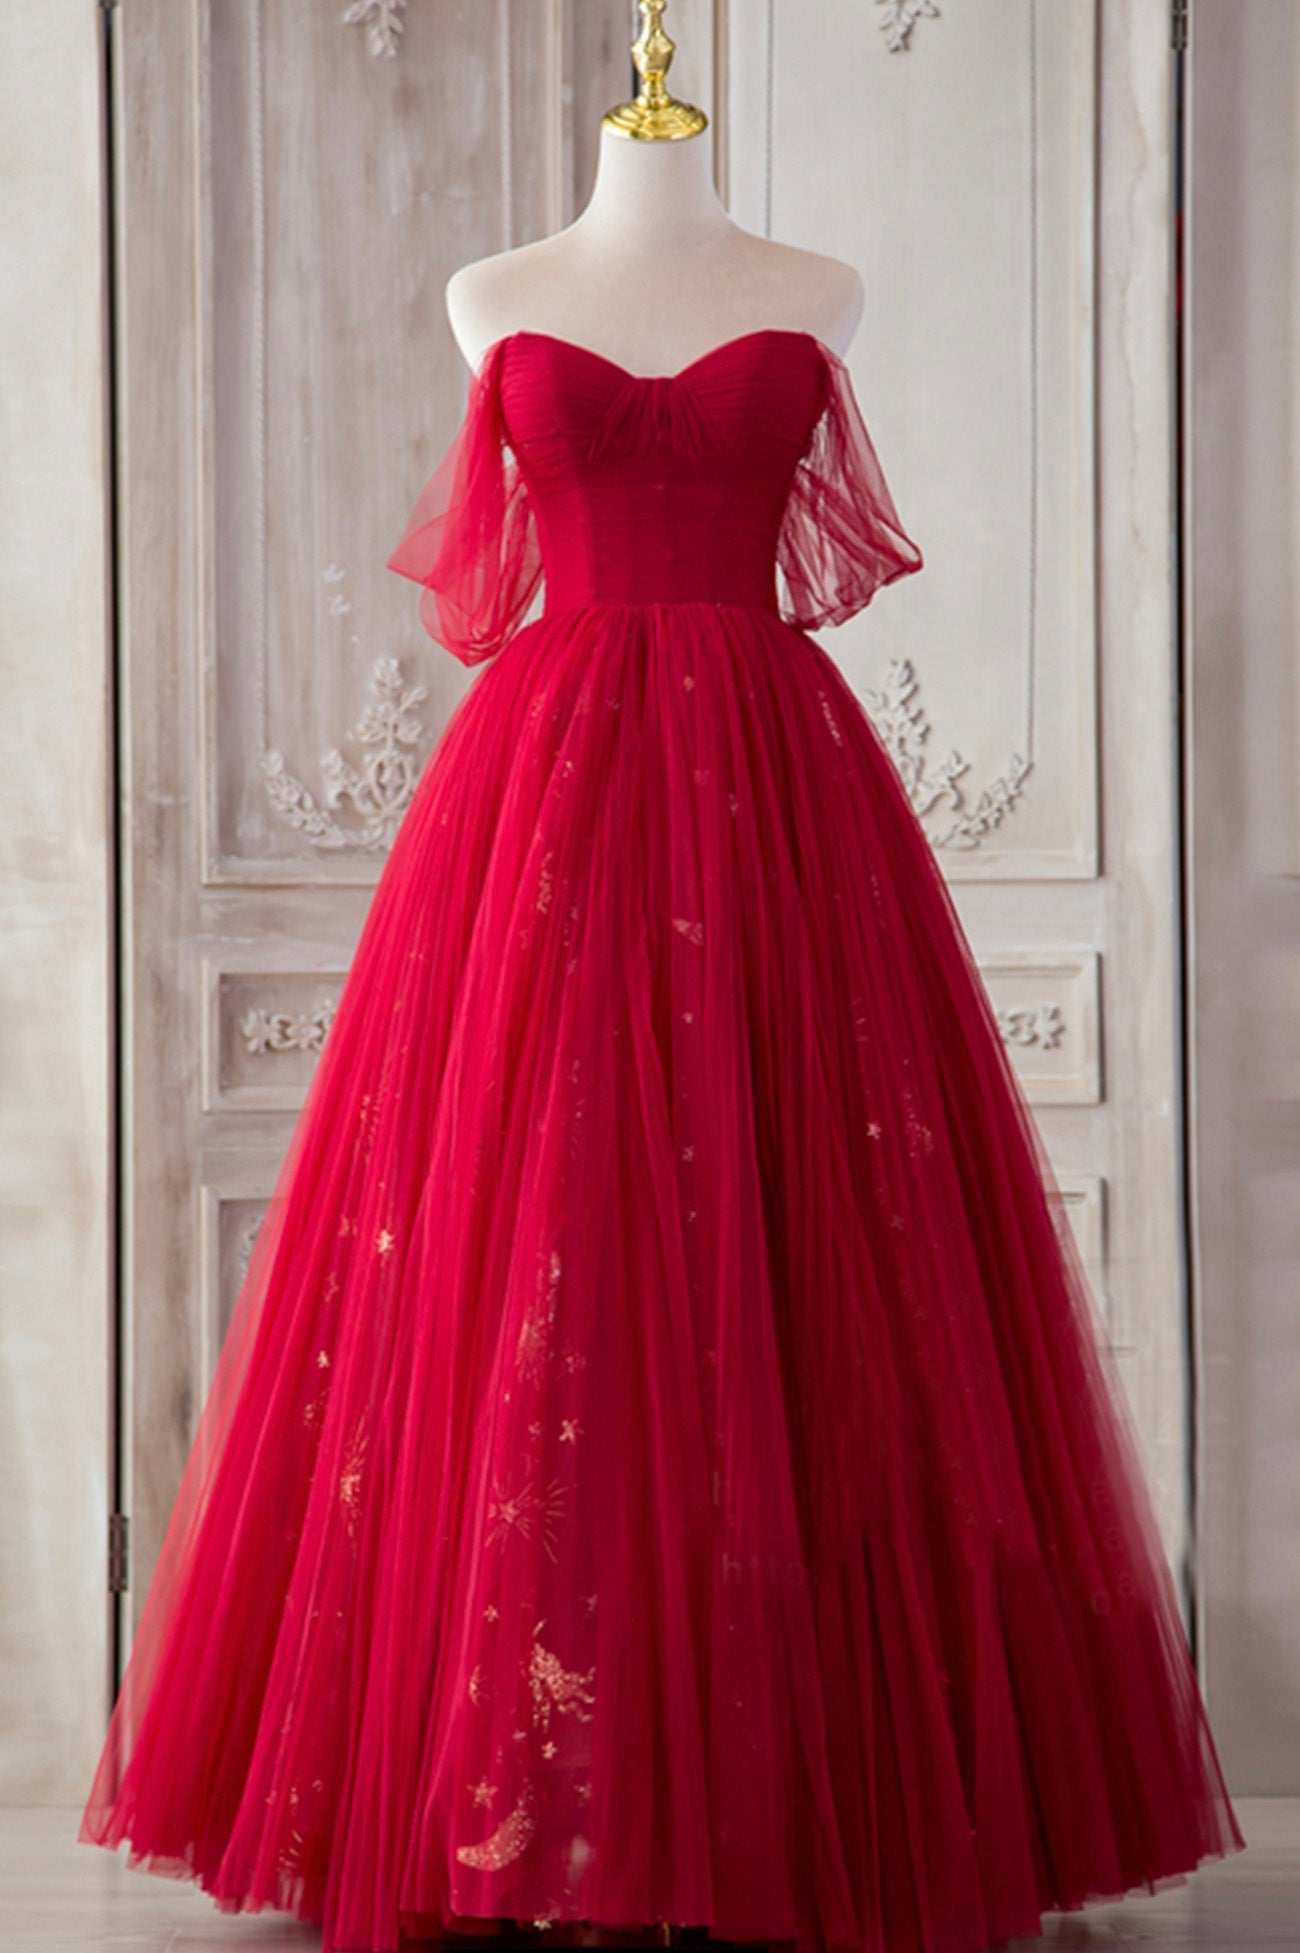 Party Dress Style Shop, Red Tulle Long Prom Dresses, A-Line Off the Shoulder Formal Dresses